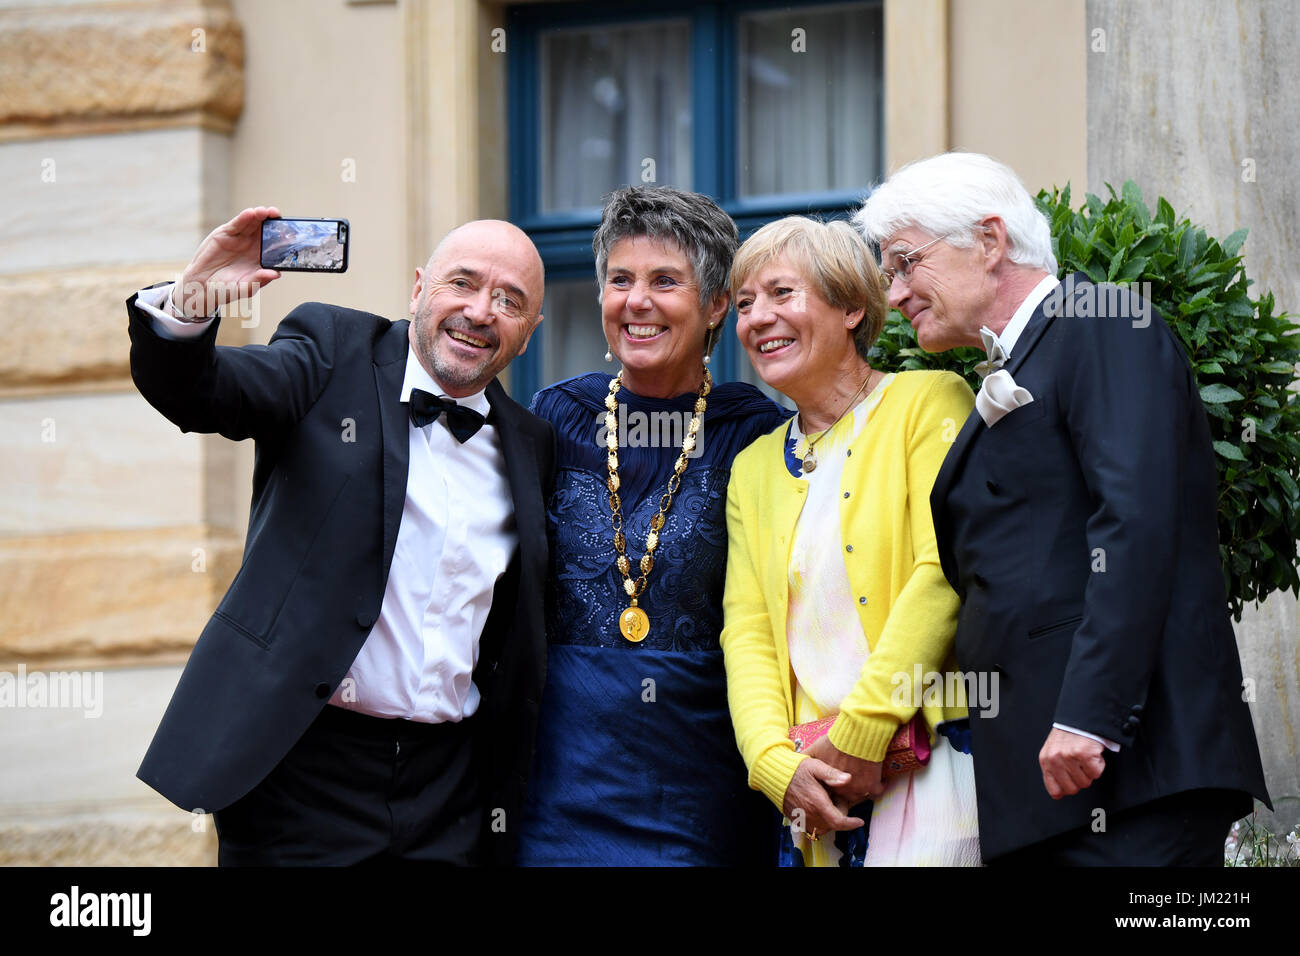 Bayreuth, Germany. 25th July, 2017. The former skiers Christian Neureuther (l), his wife Rosi Mittermaier (2.f.r), mayoress of Bayreuth, Brigitte Merk-Erbe (Bayreuther Gemeinschaft, 2.f.l) and her husband Thomas Erbe pose at the opening of the Bayreuth Festival 2017 in Bayreuth, Germany, 25 July 2017. The festival opens with the opera 'Die Meistersinger von Nuernberg' (The Master-Singers of Nuremberg). Photo: Tobias Hase/dpa/Alamy Live News Stock Photo